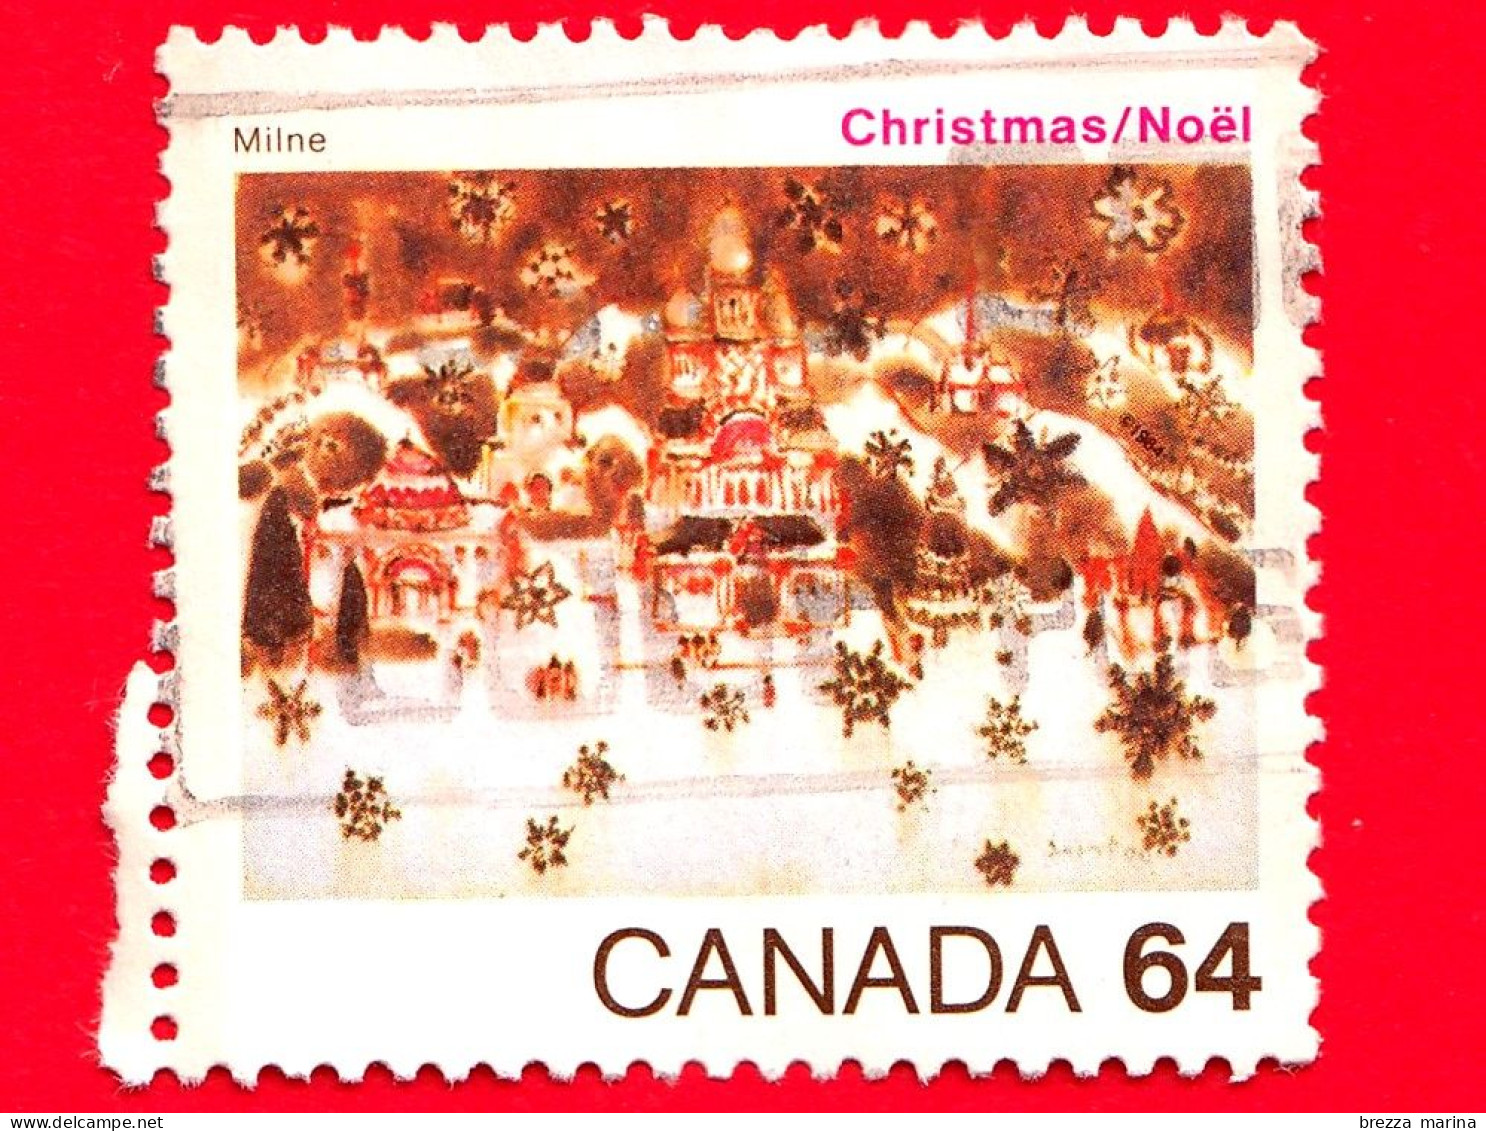 CANADA - Usato - 1984 - Natale - Christmas - Noel - Neve A Betlemme Dipinto Di David Milne - 64 - Used Stamps